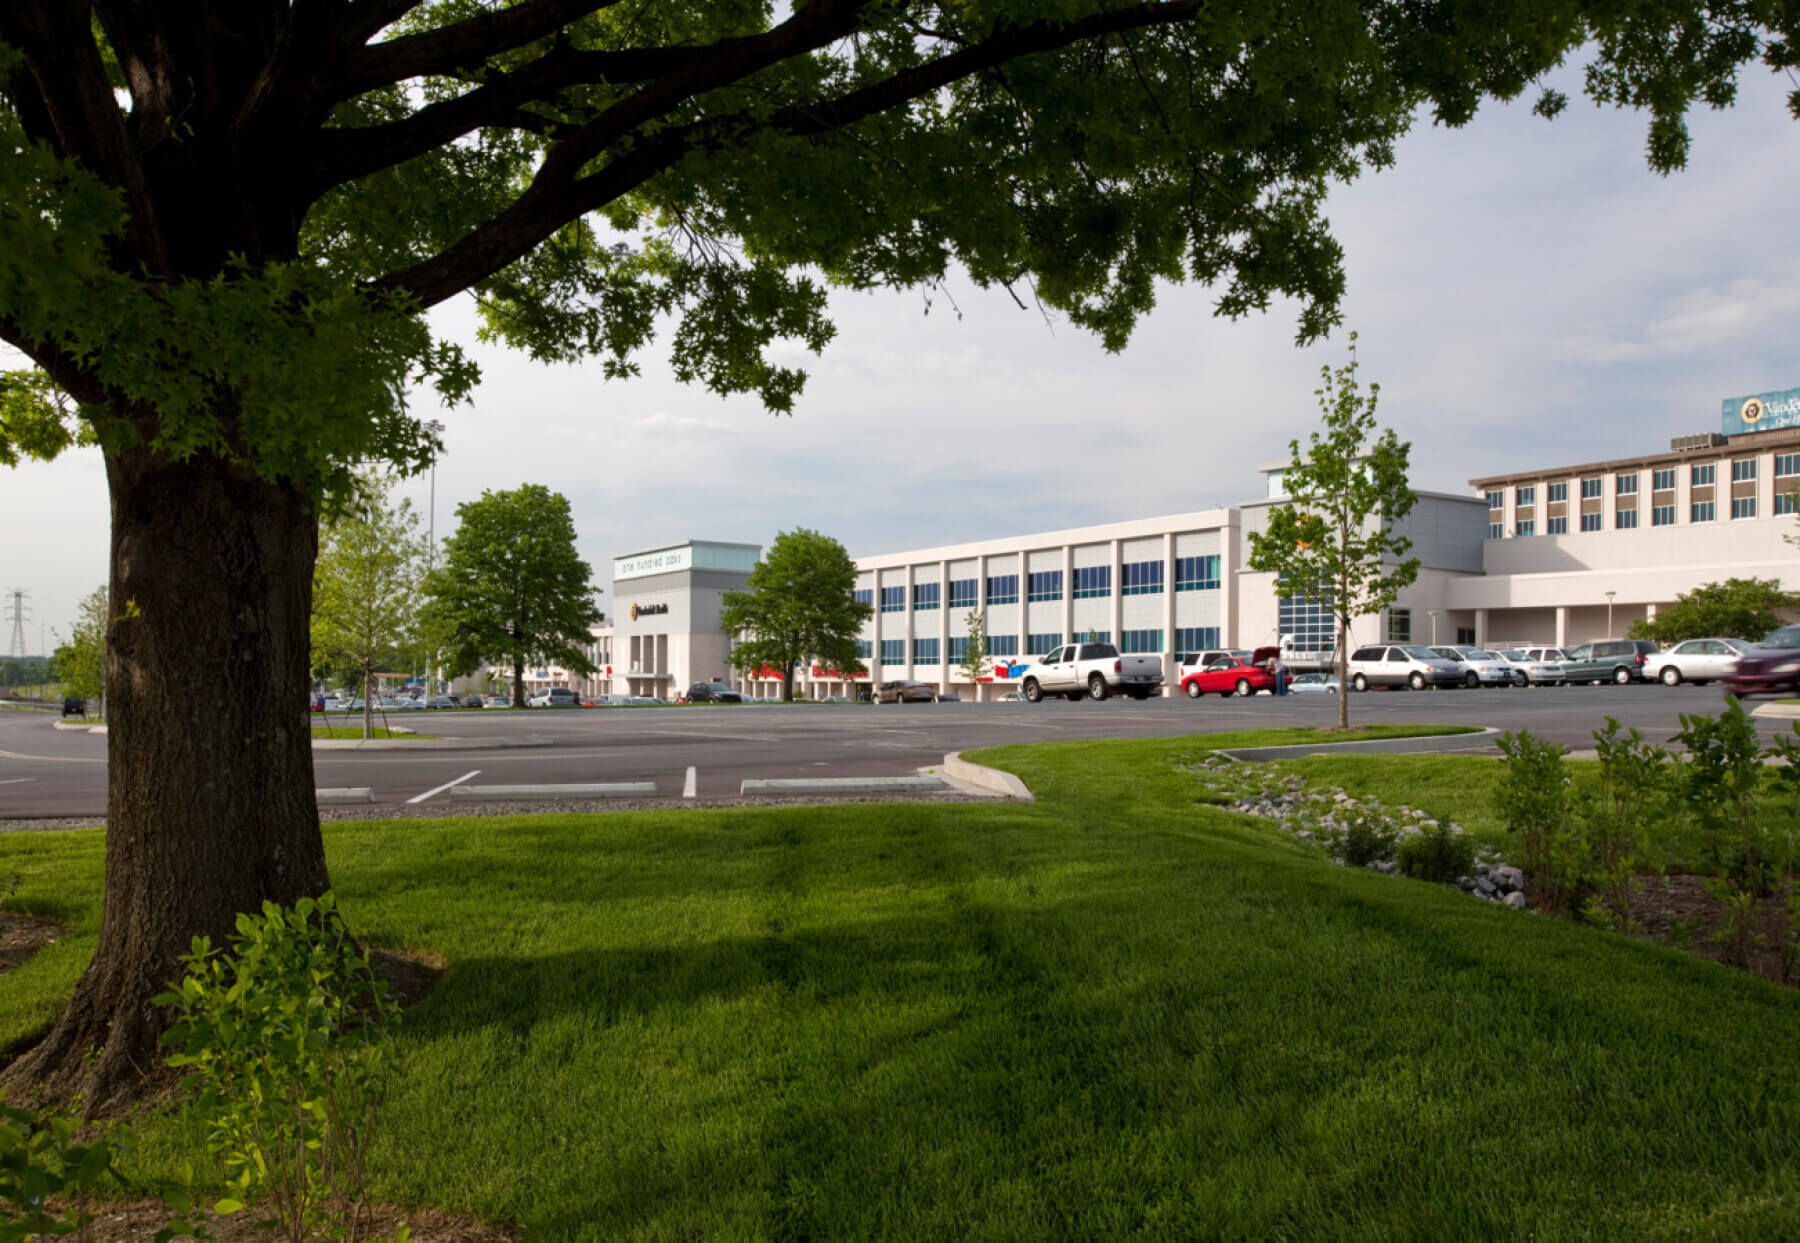 view of the parking lot with oak trees